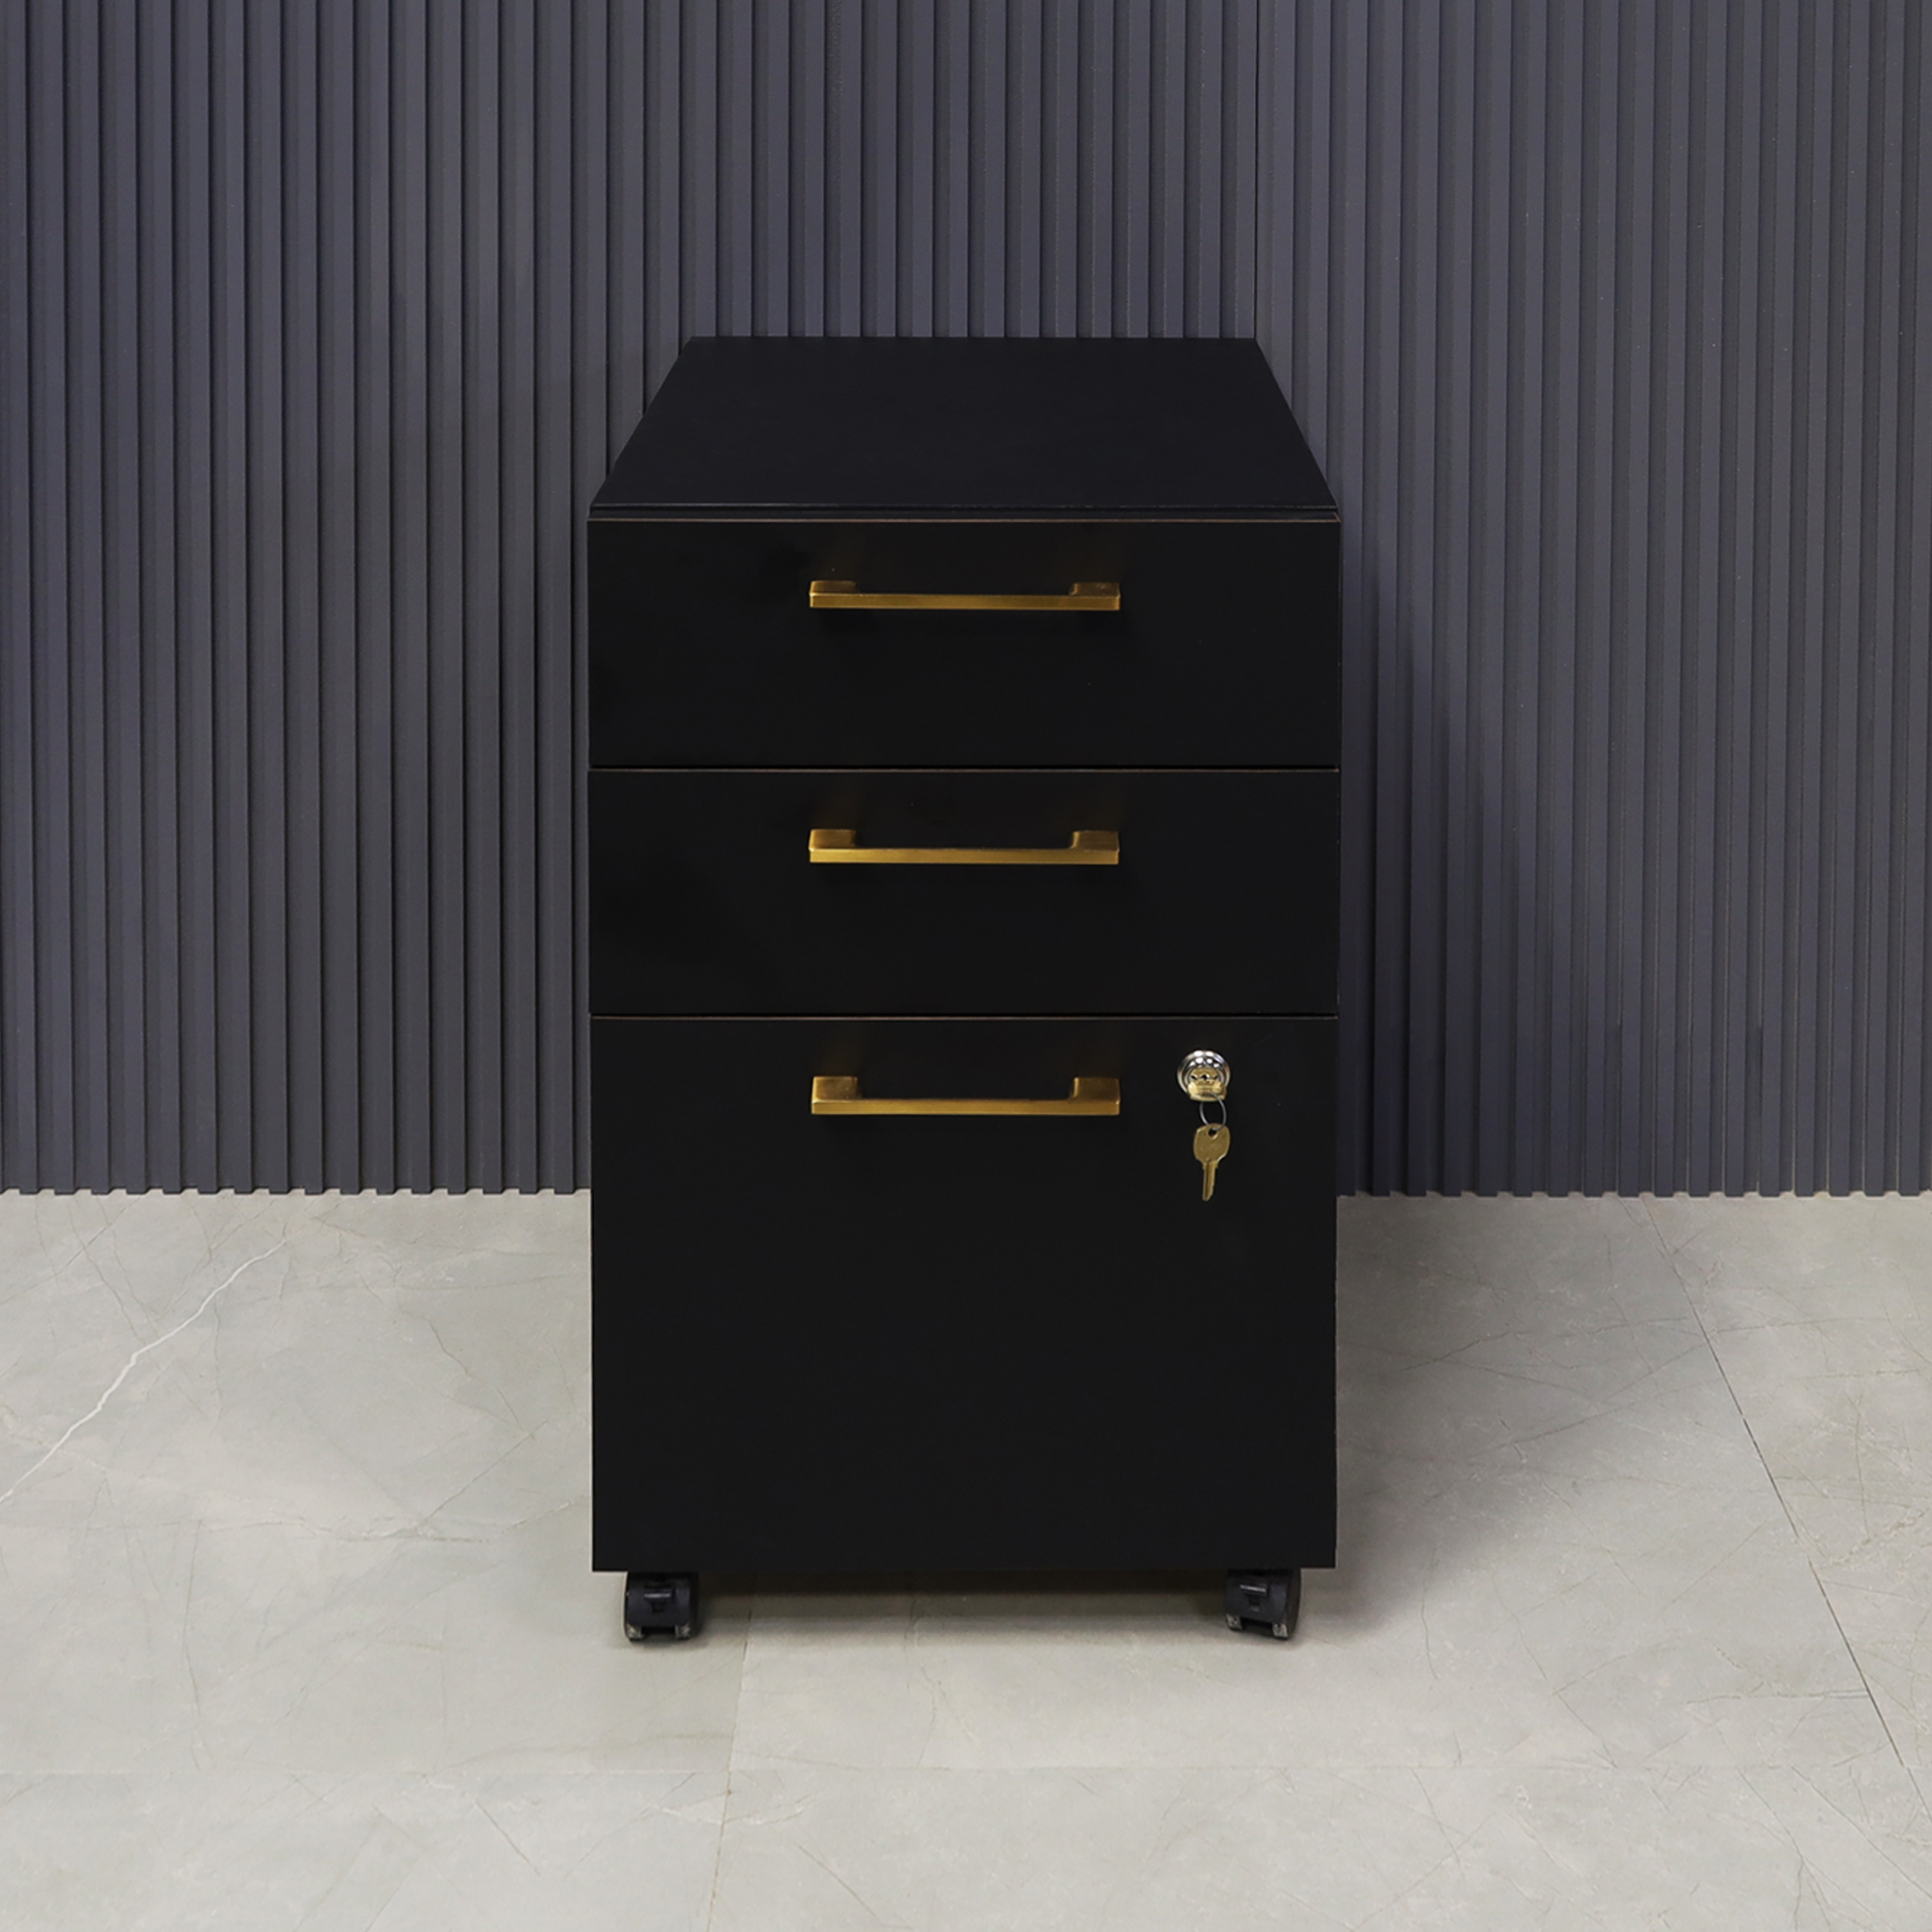 Naples Custom Mobile Storage Cabinet in black matte laminate and lock on third drawer, shown here.